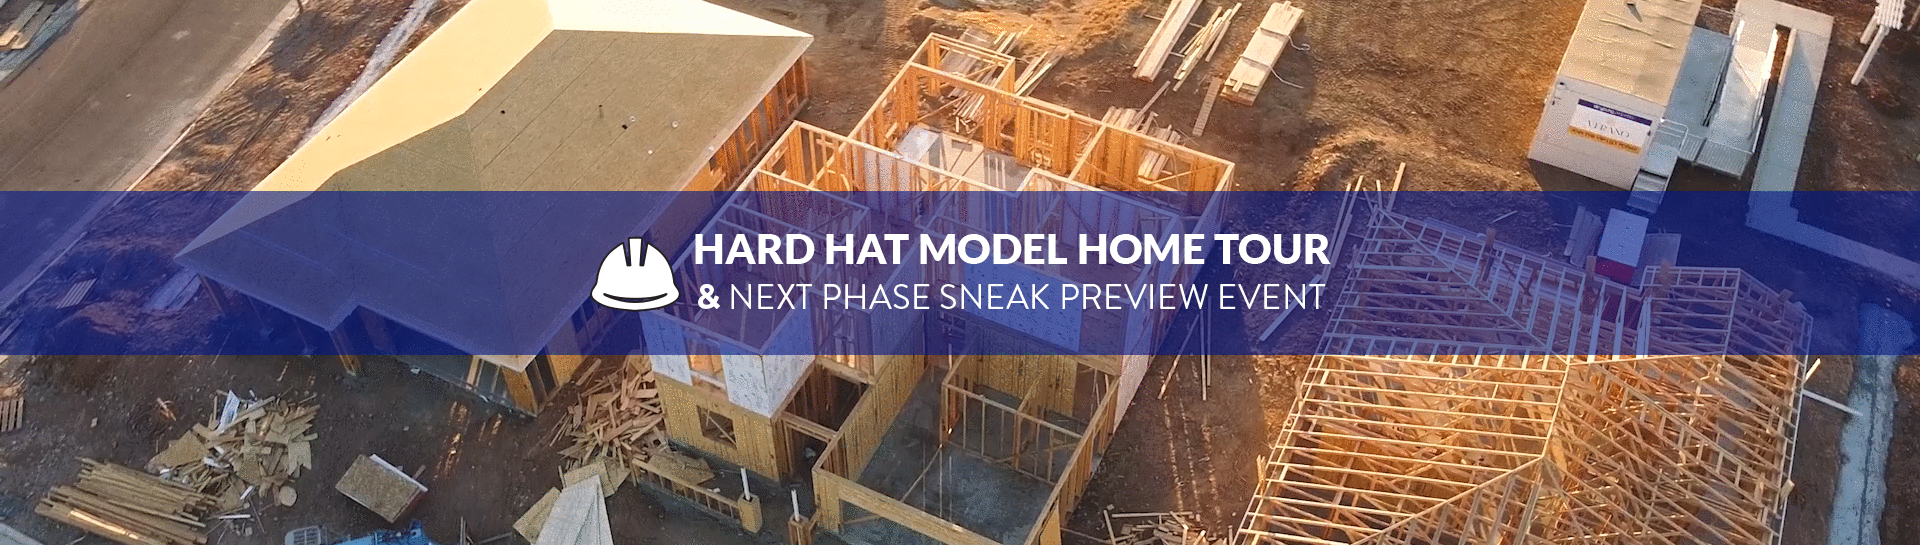 Join Us For A Sneak Peek Of The Next Phase At Verano And Tour Our New Models Under Construction!